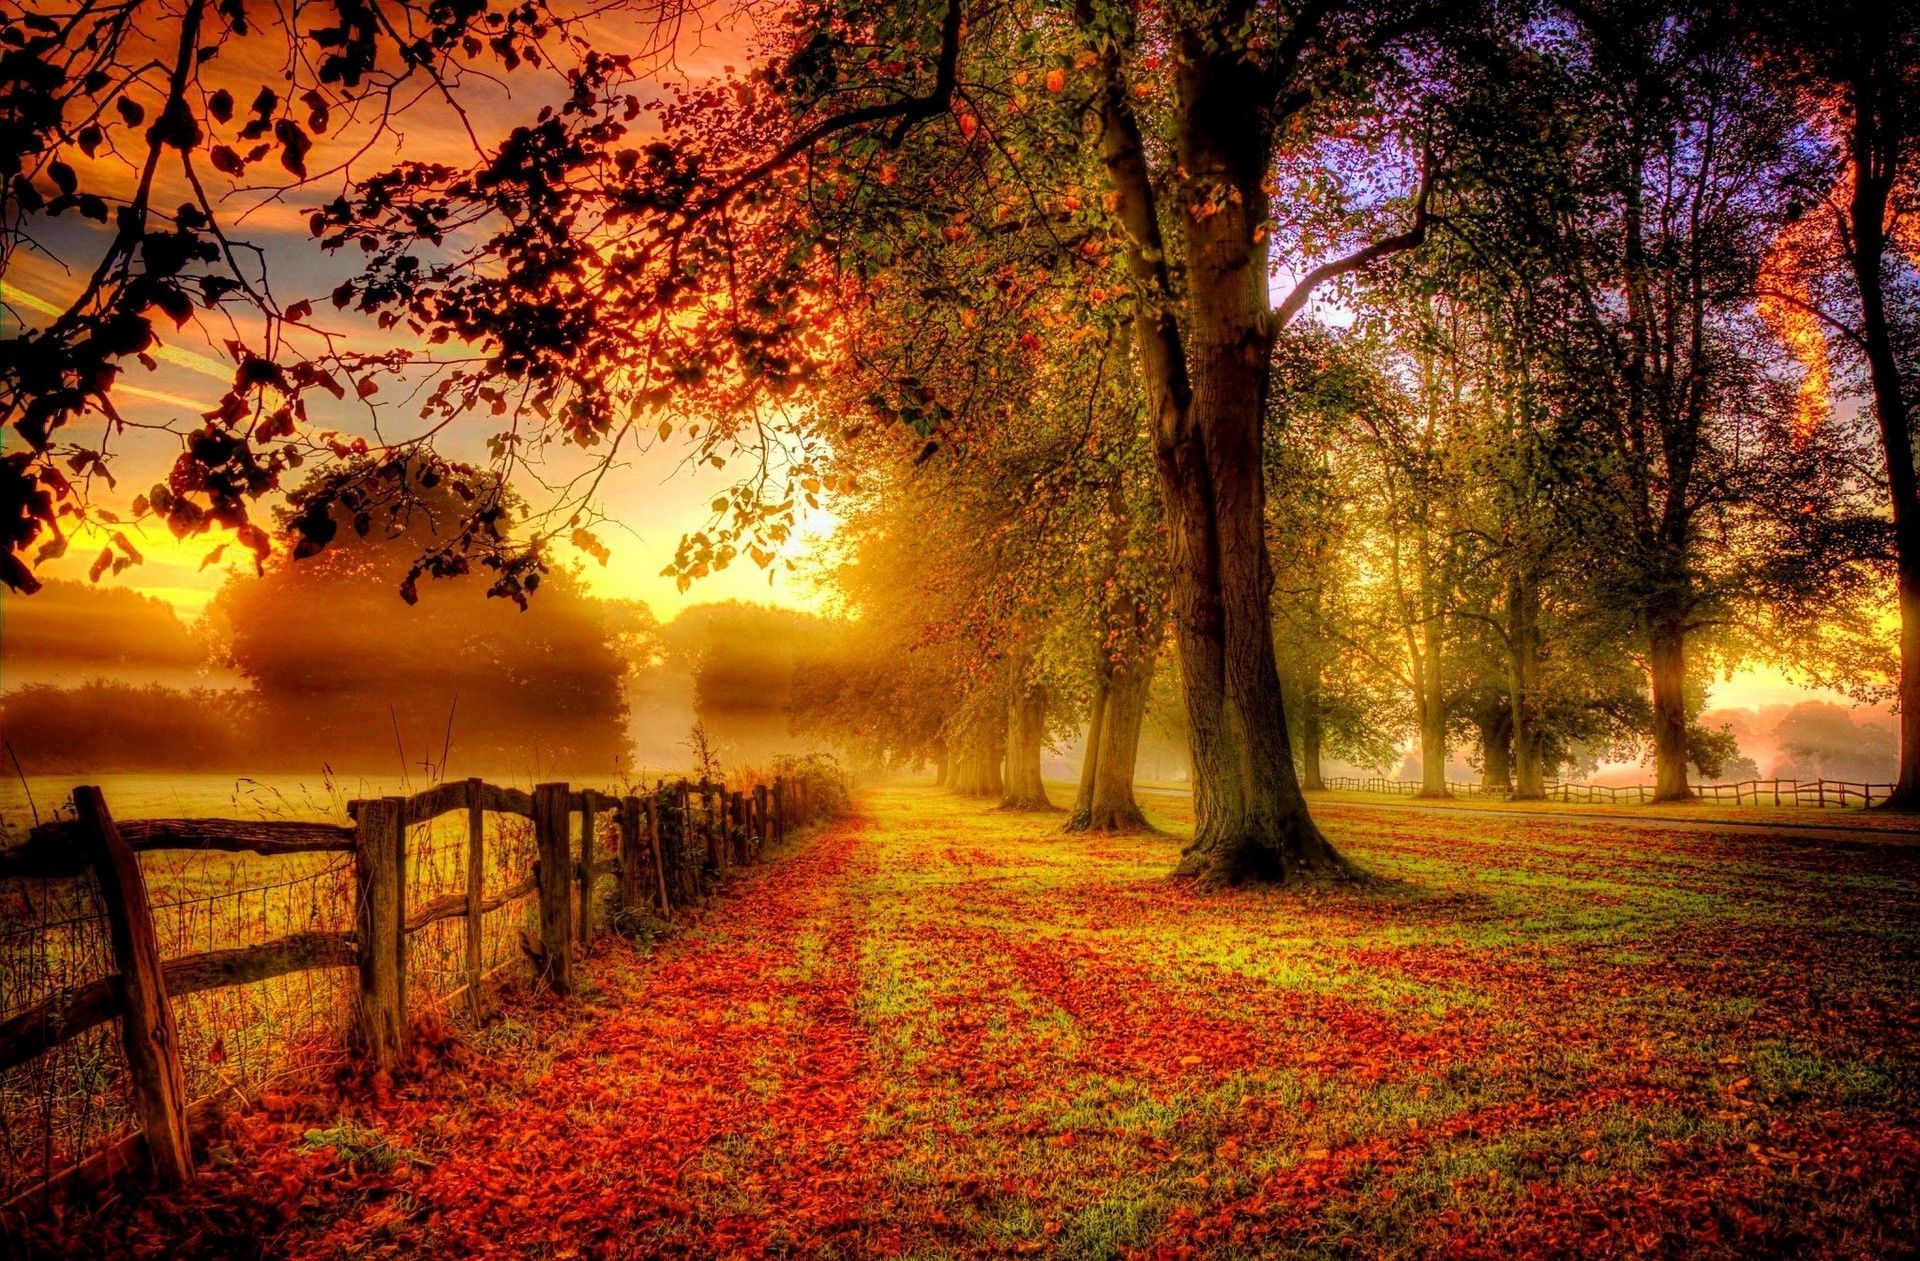 morning, Fence, Fall, Sunrise, Trees, Field, Clouds, Mist, Nature, Landscape, Red, Yellow, Green Wallpaper HD. Autumn landscape, Autumn scenery, Scenery